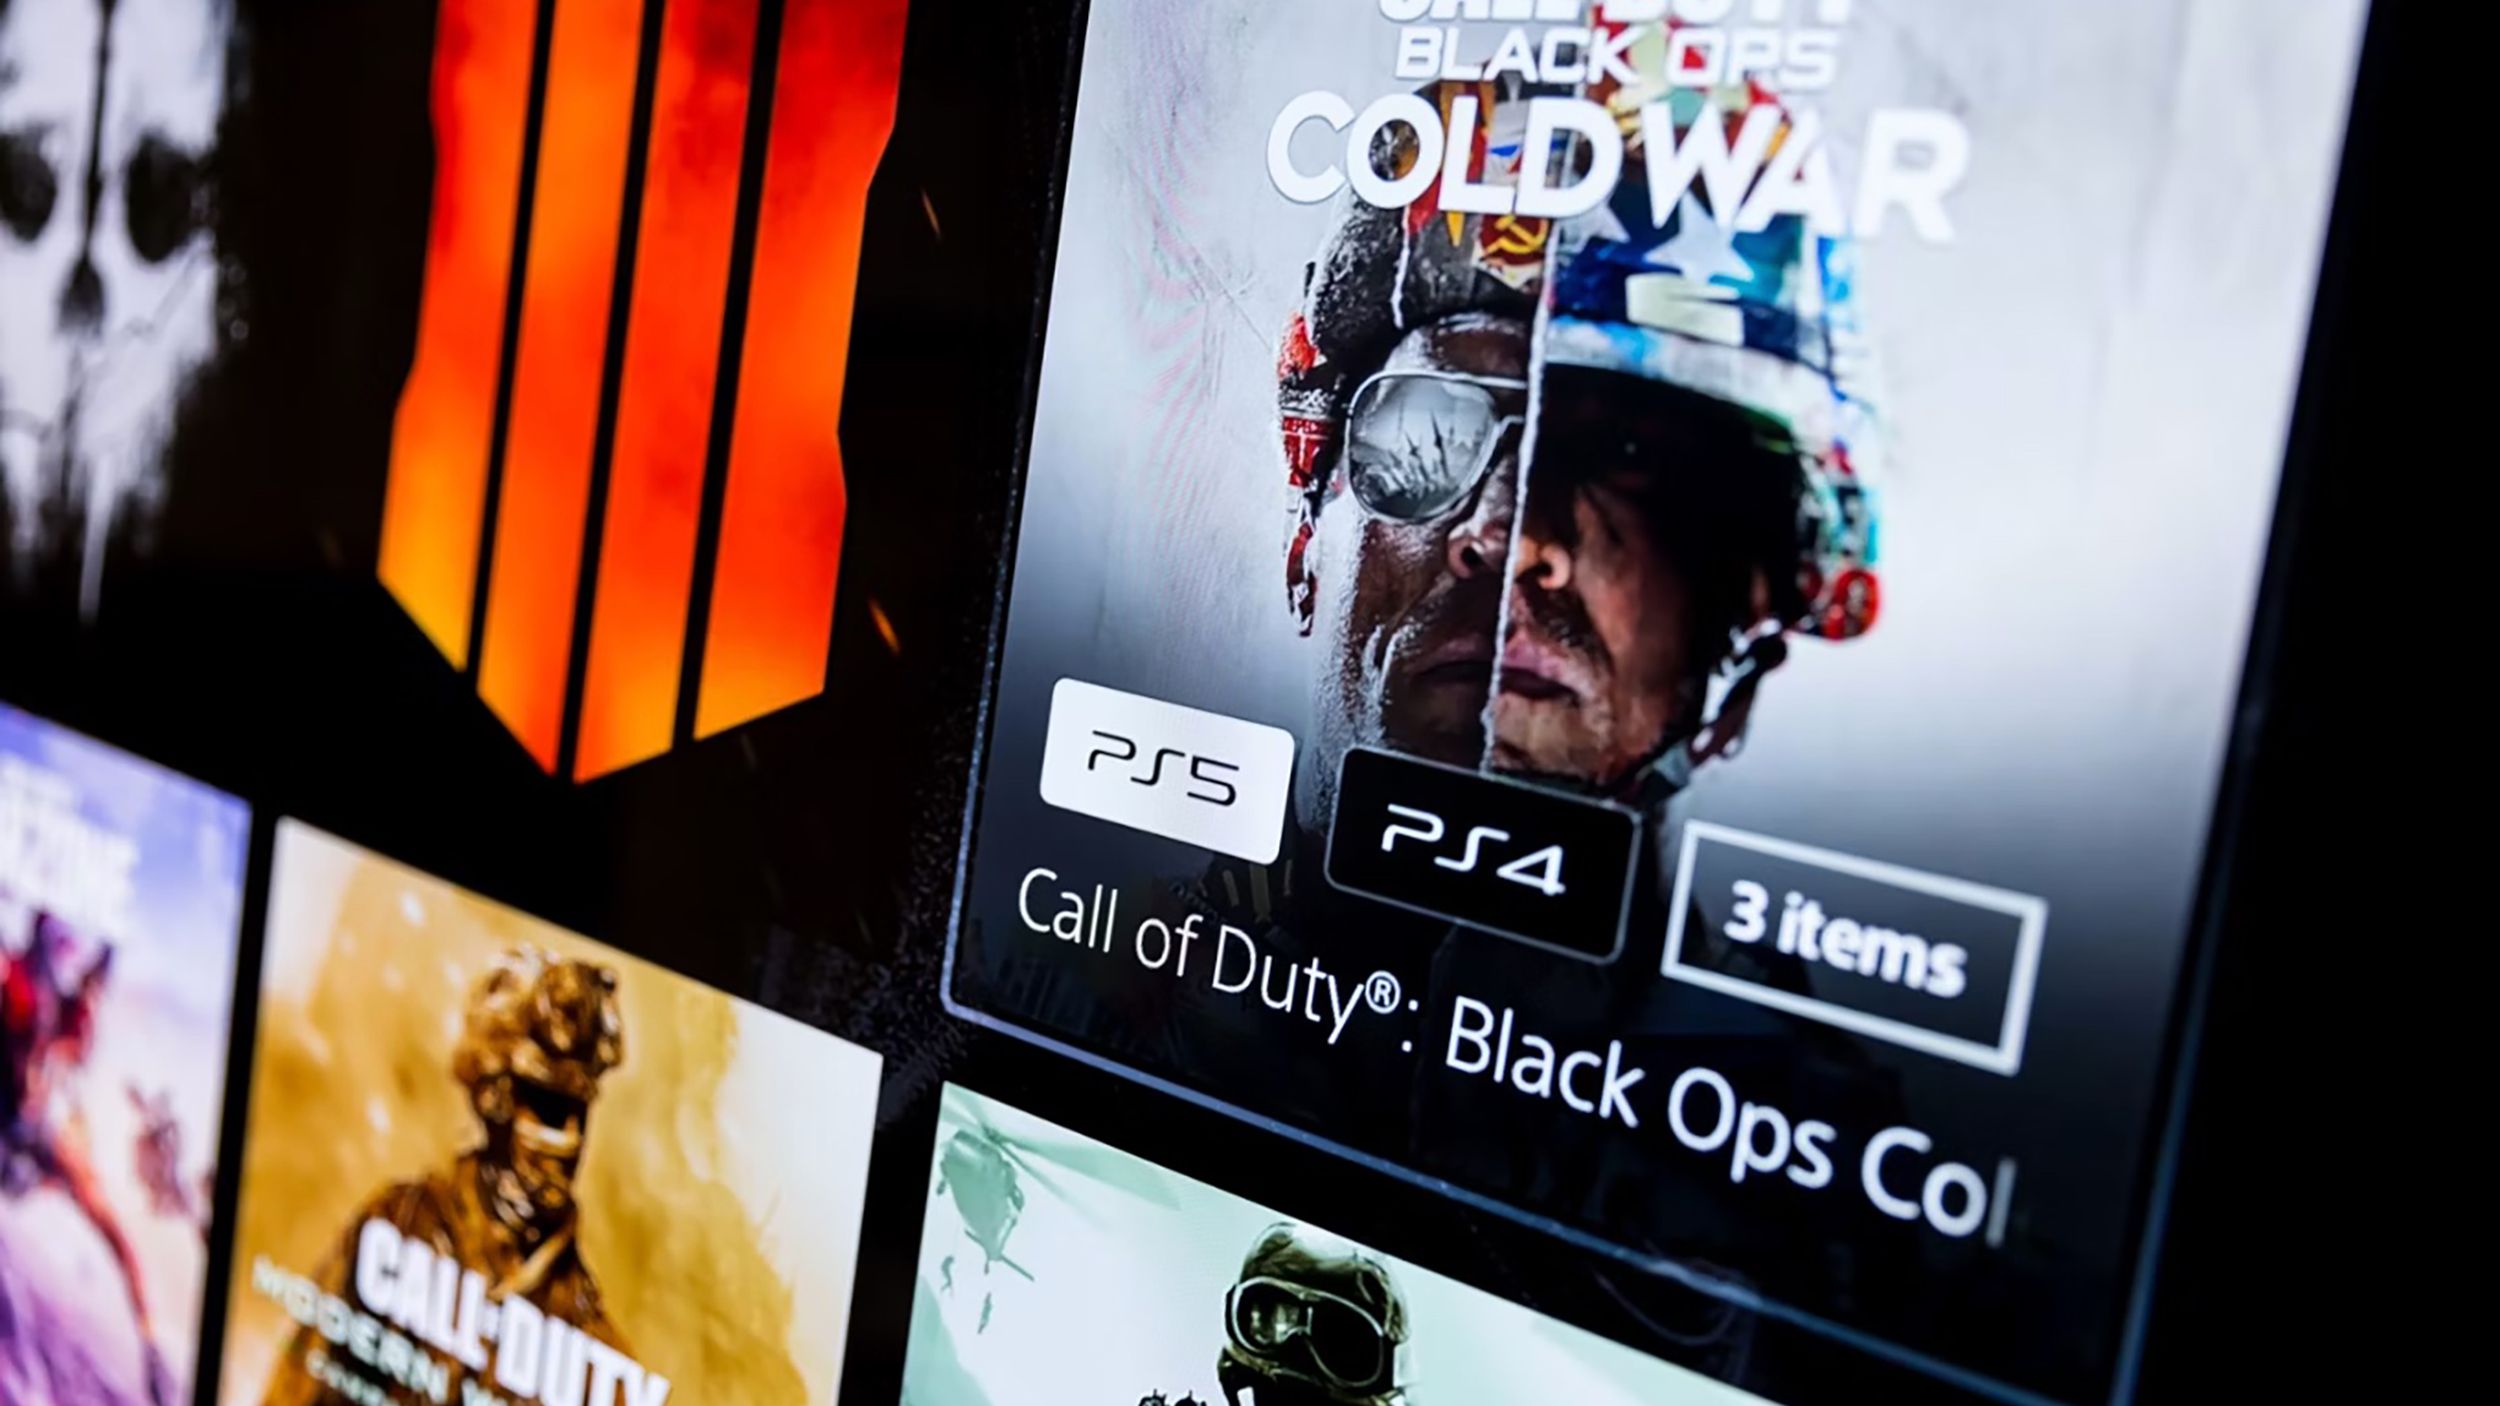 Some PS5 Owners Are Playing the PS4 Version of Call of Duty by Mistake